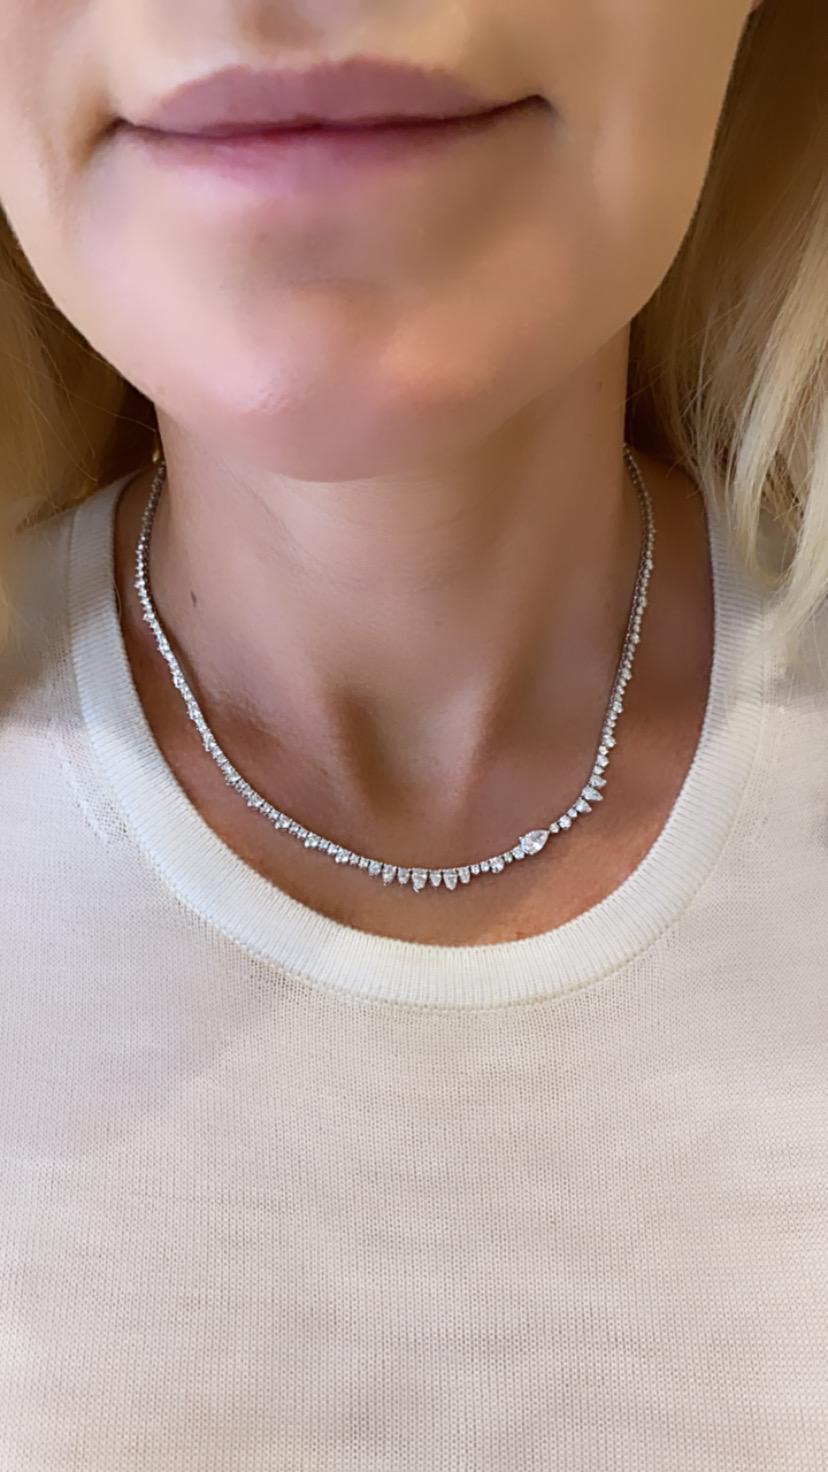 18 Karat white gold Classic Diamond necklace created by Monan with 4.50 carats of mixed brilliant cut diamonds, all E-G colour and VS-VVS clarity.
